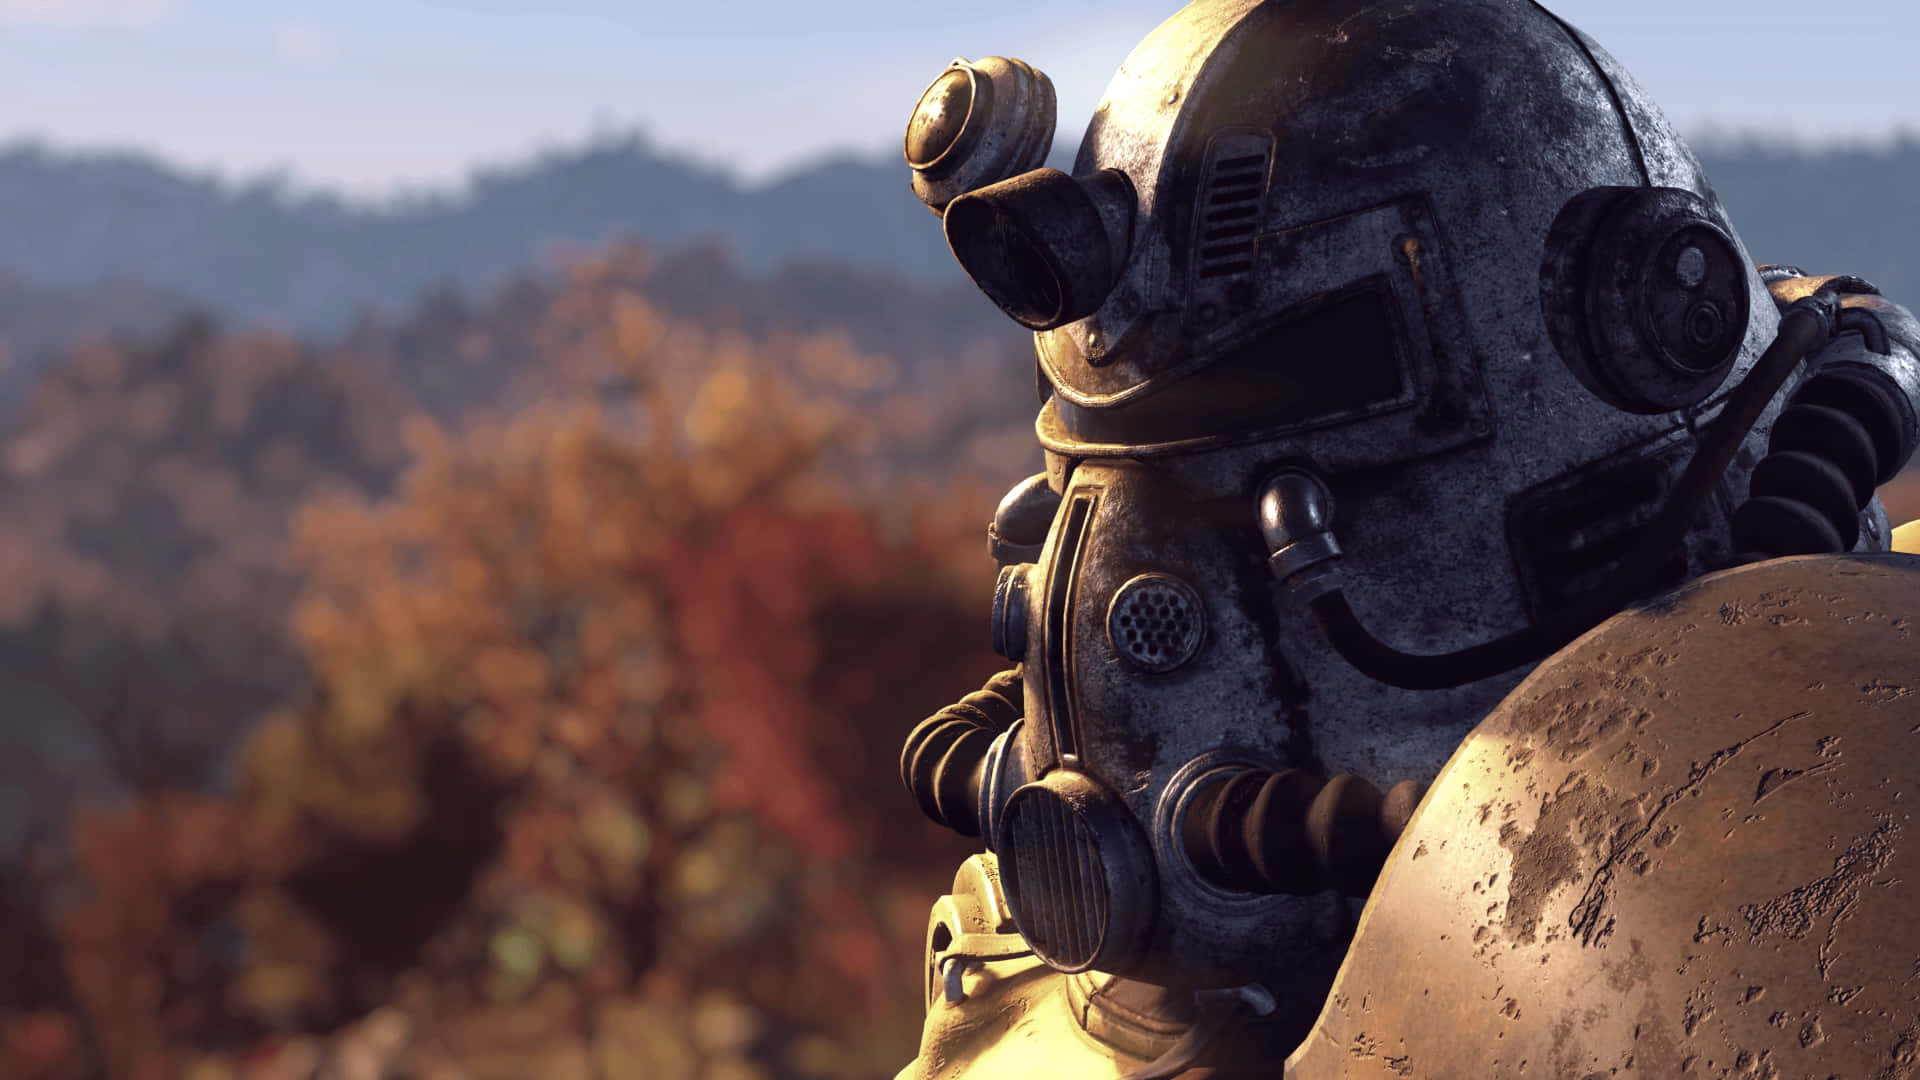 Fallout 76 Background